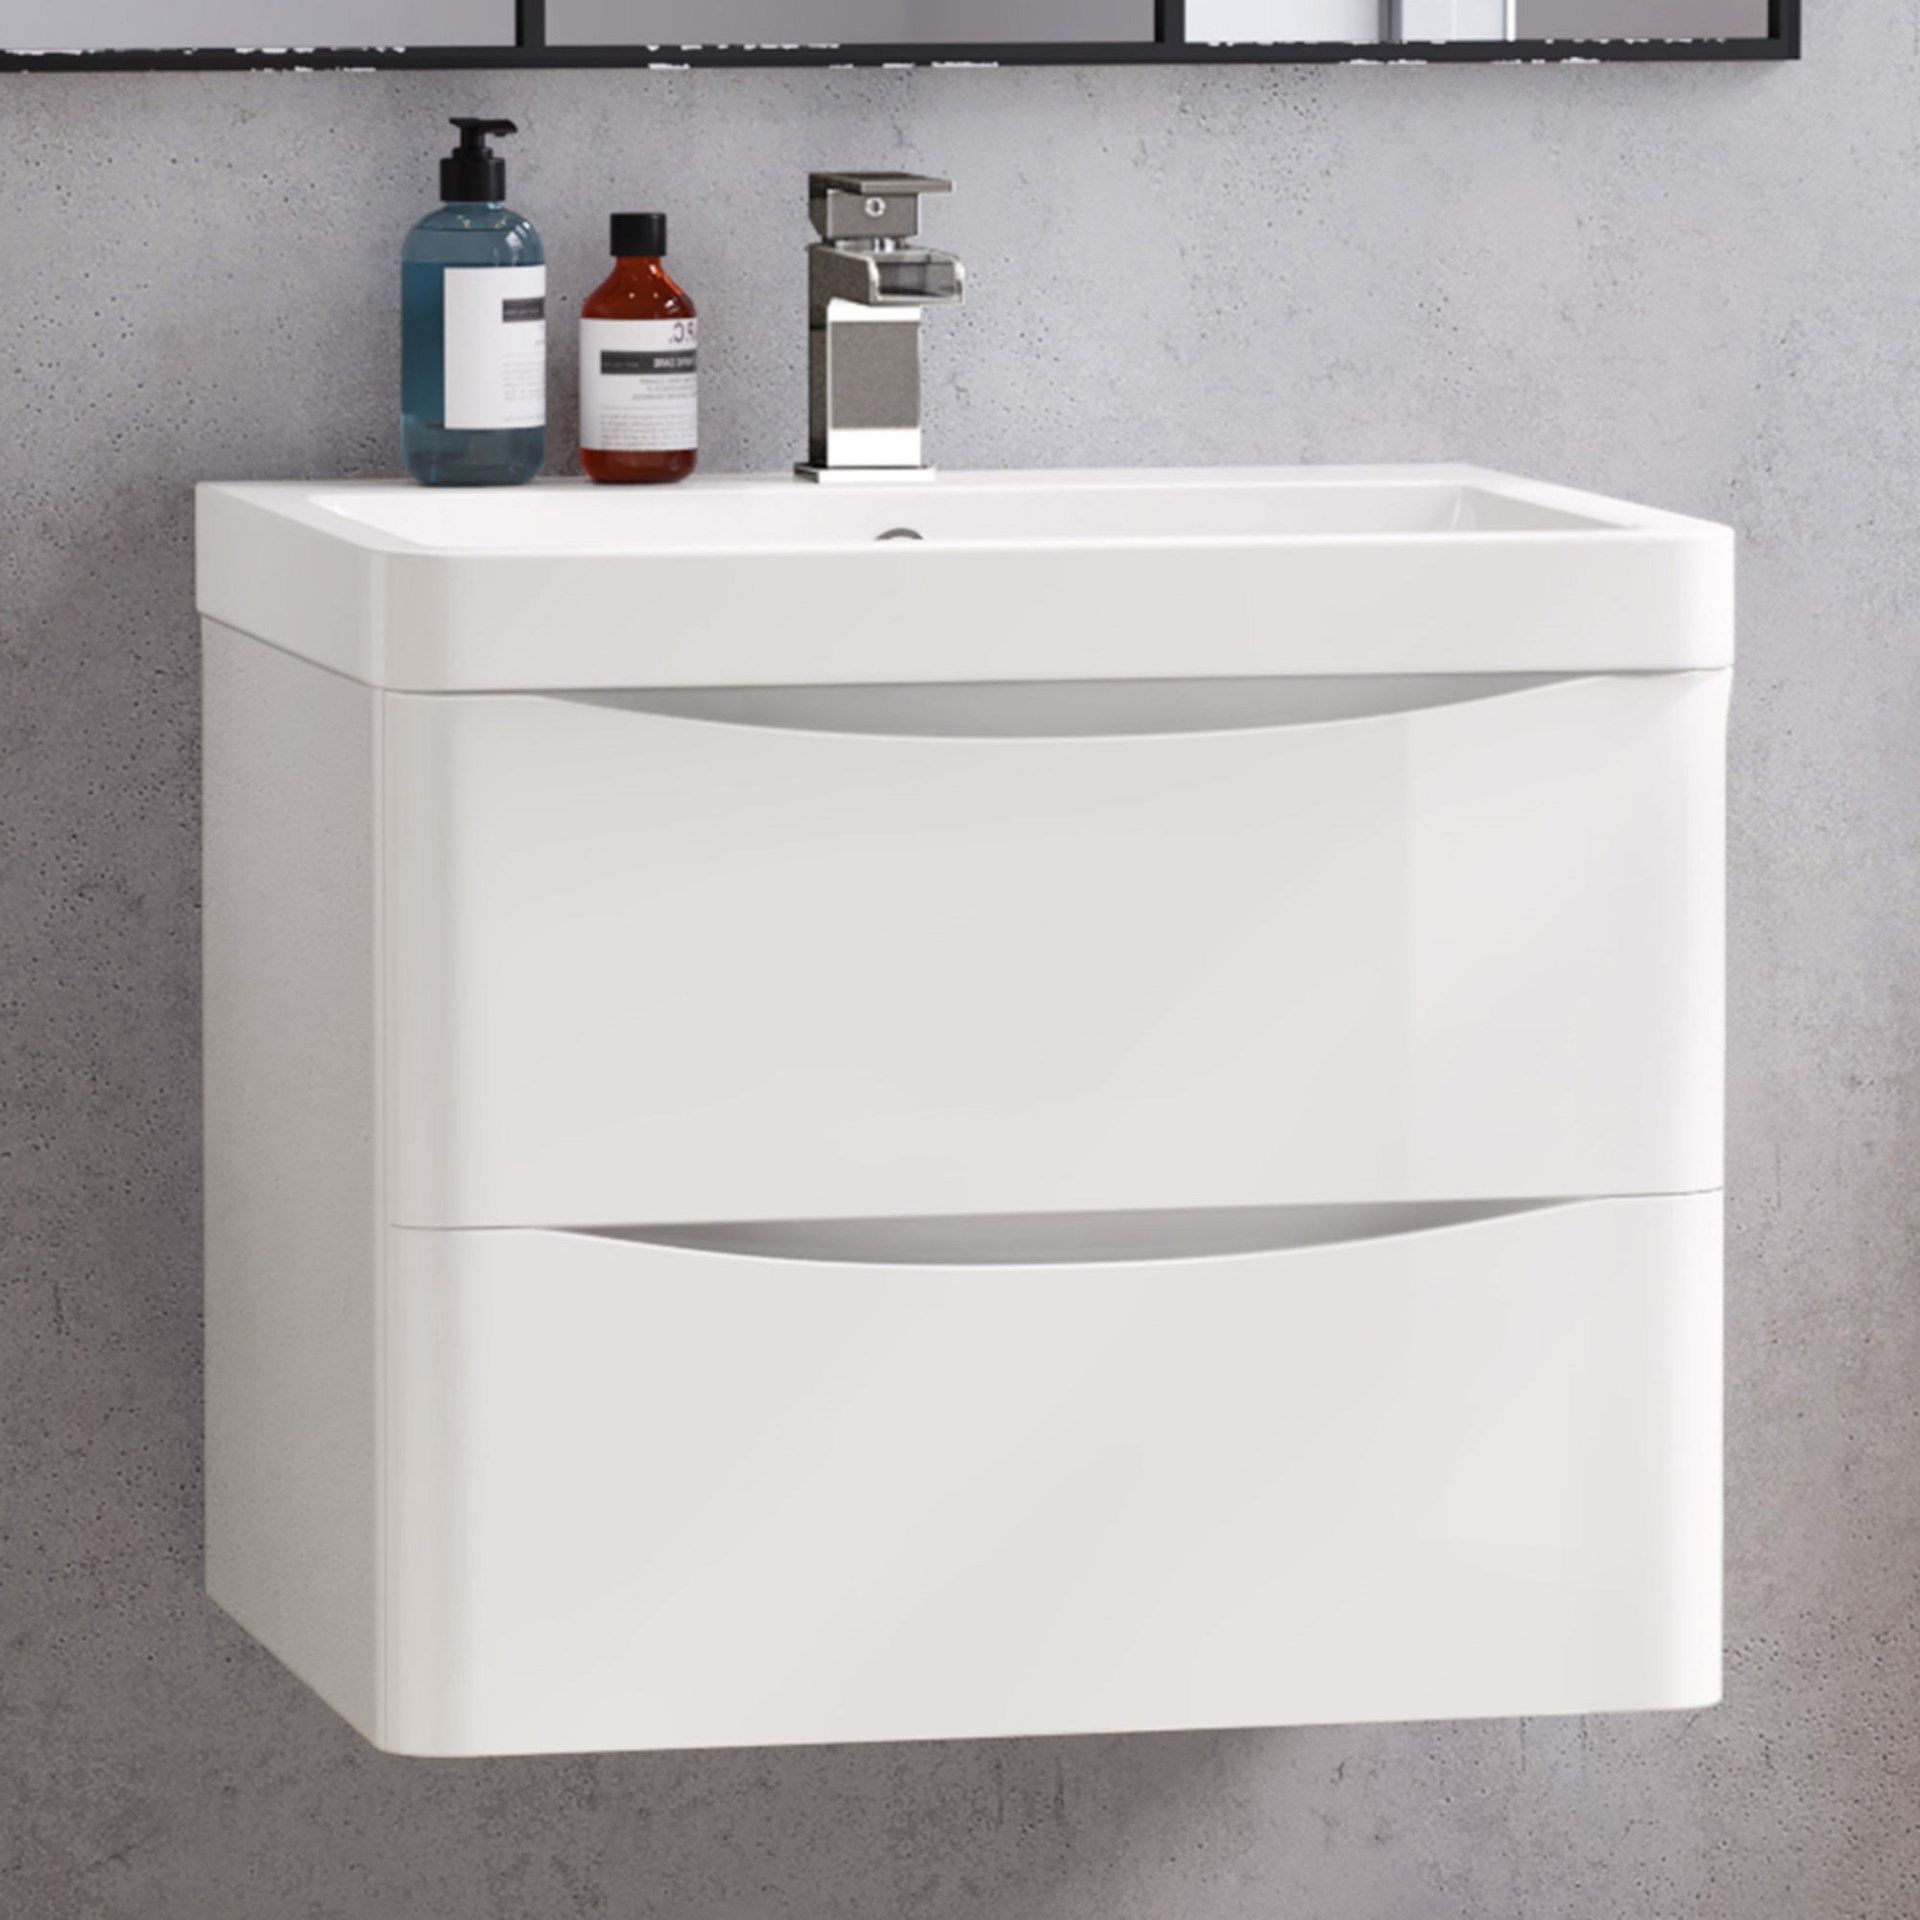 New & Boxed 600mm Austin Gloss White Built In Basin Drawer Unit - Wall Hung.Mf2417 RRP £749.99...